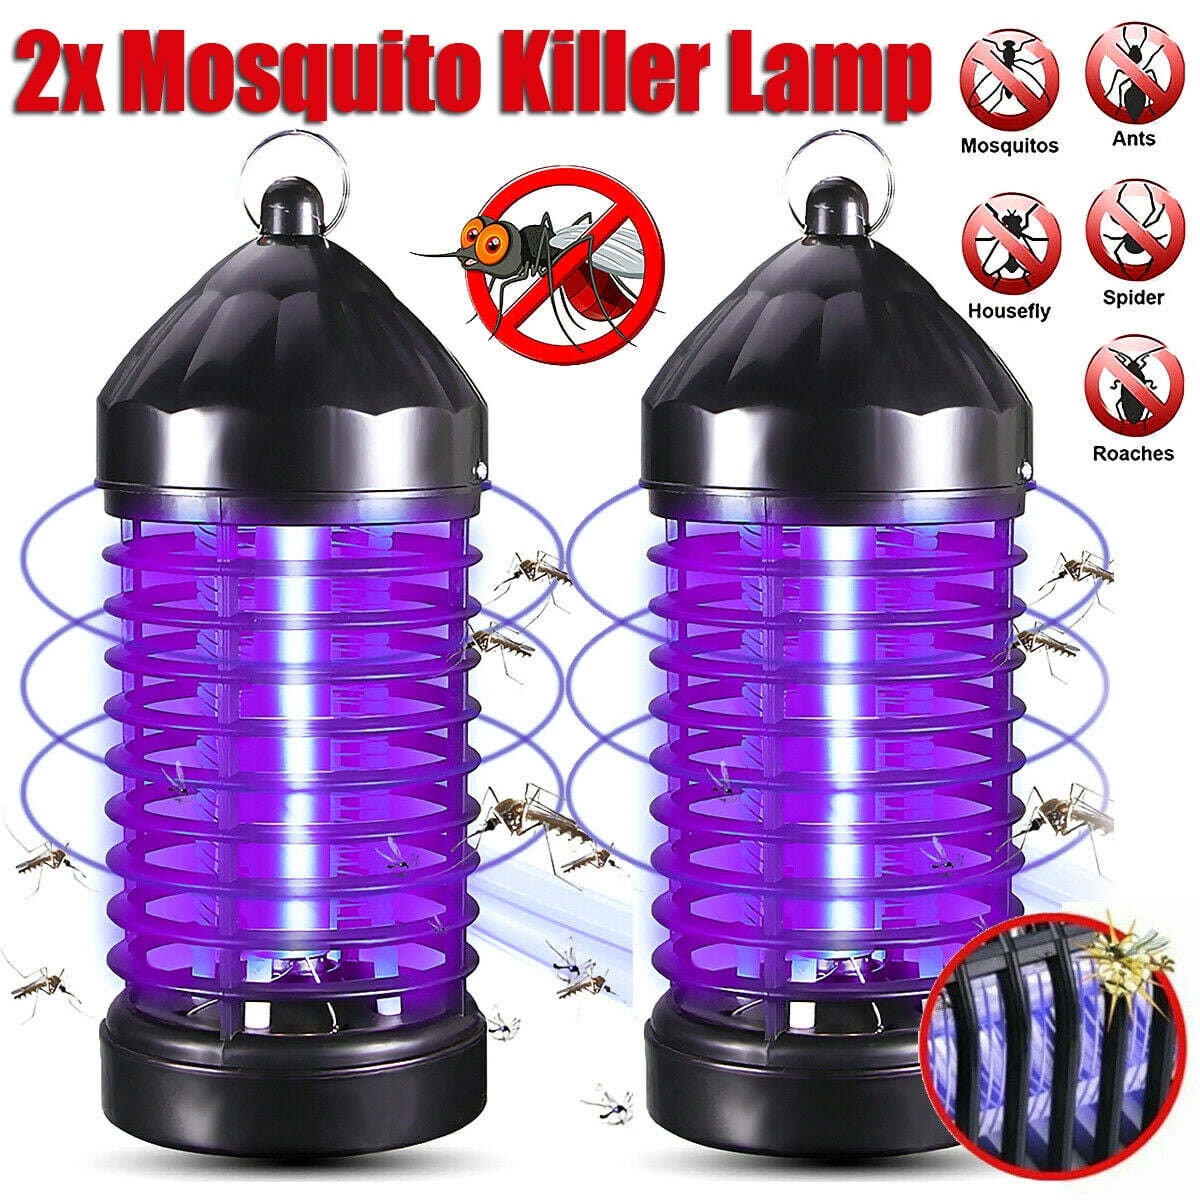 2PCS Electric UV Light Mosquito Killer Insect Fly Bug Trap Catcher Lamps US 